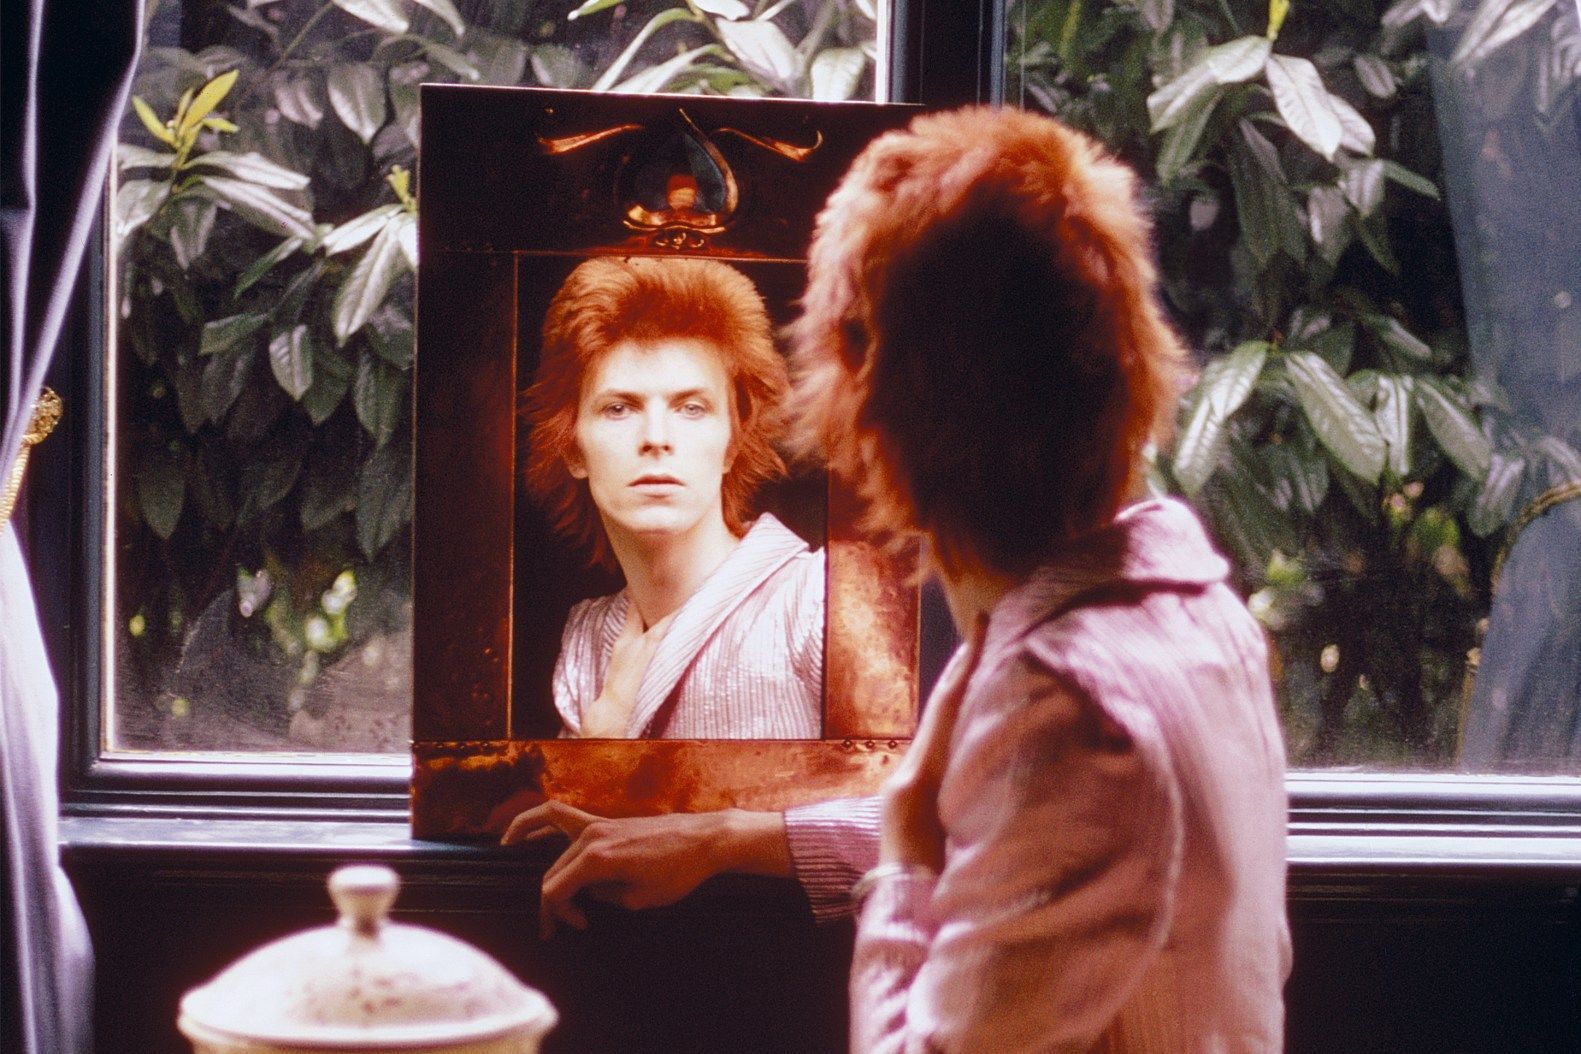 David Bowie with his face on a painting - David Bowie